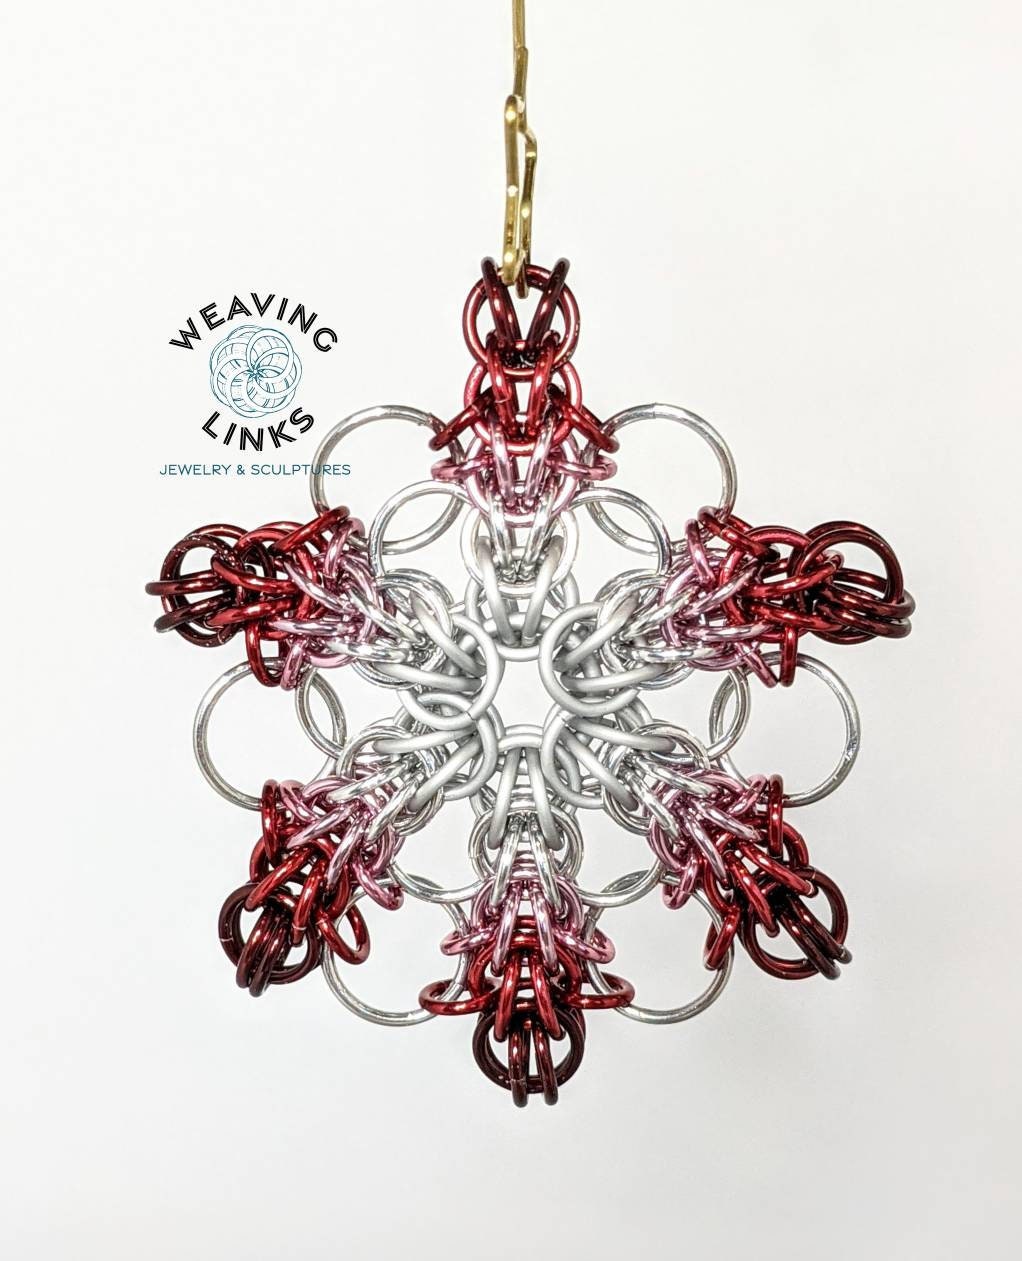 Instructions for Ombre Steampunk Snowflake Ornament